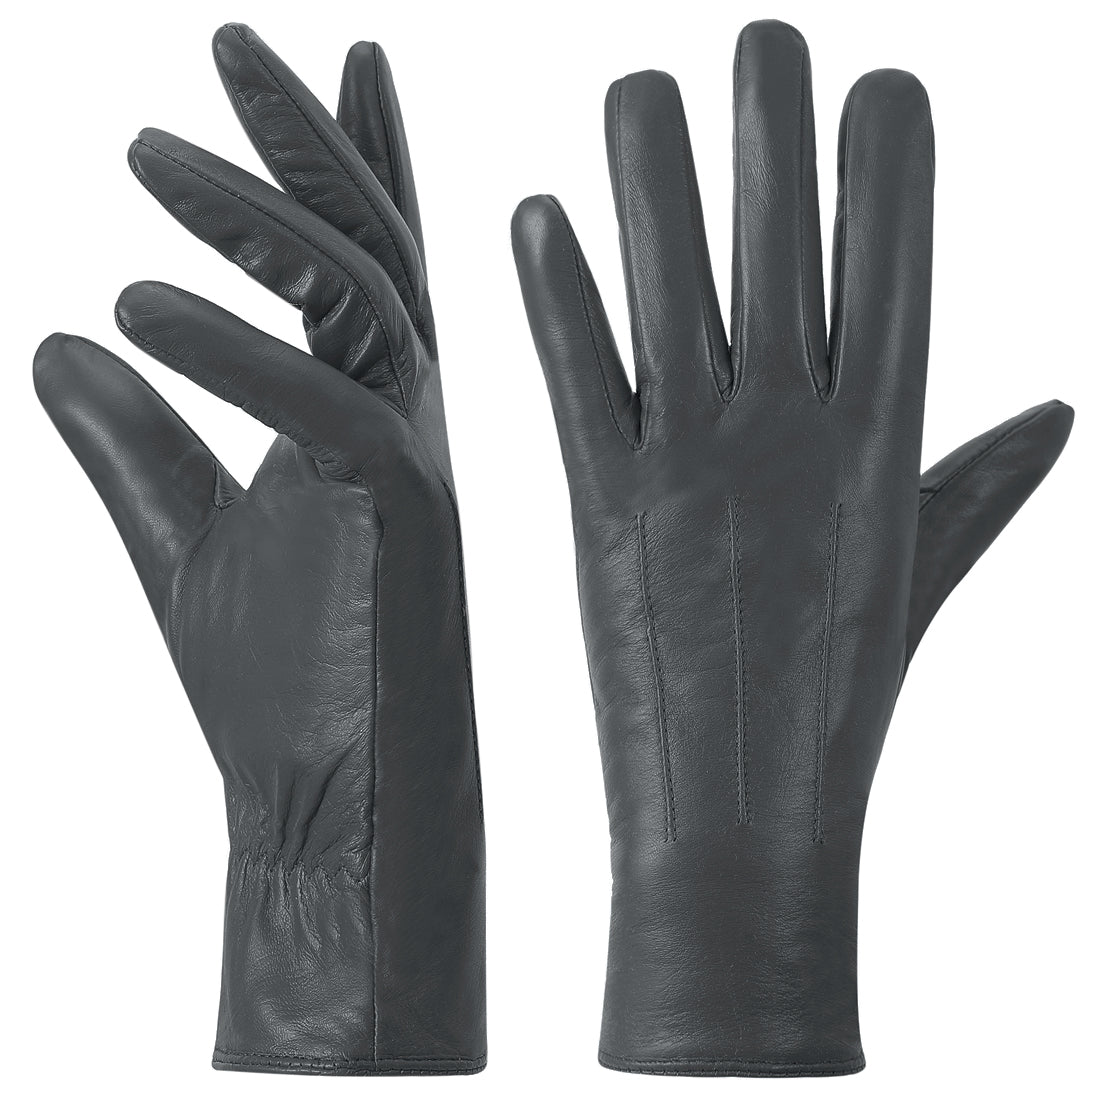 Leather Gloves for Men,Winter Sheepskin Leather Driving Gloves,Touchscreen  Wool Fleece Lined Warm Gloves for Gift